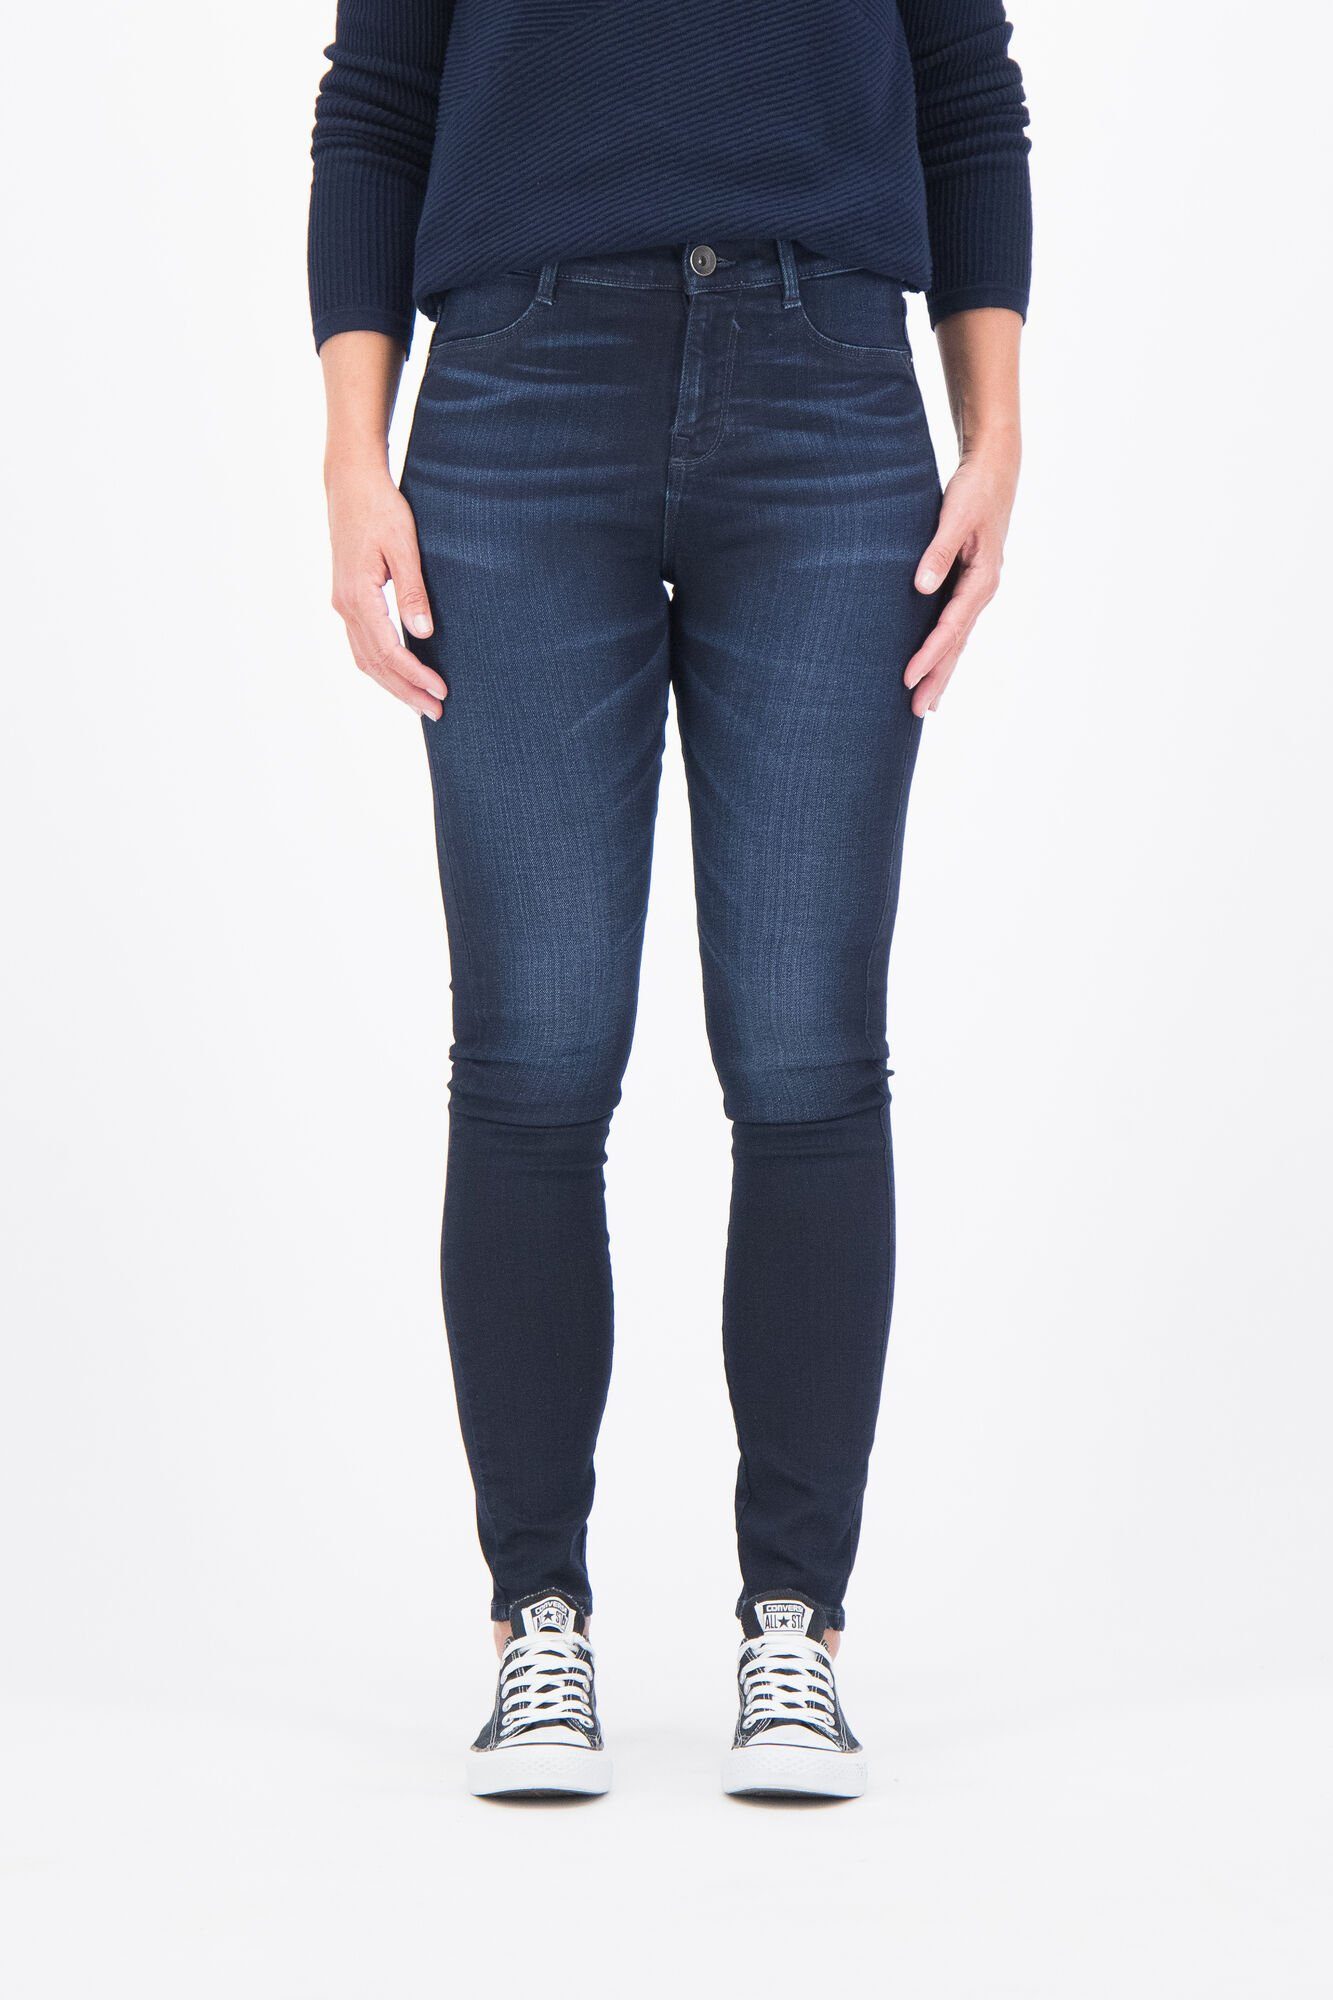 Garcia Skinny-fit-Jeans mit hoher Taille, Hohe Taille online kaufen | OTTO